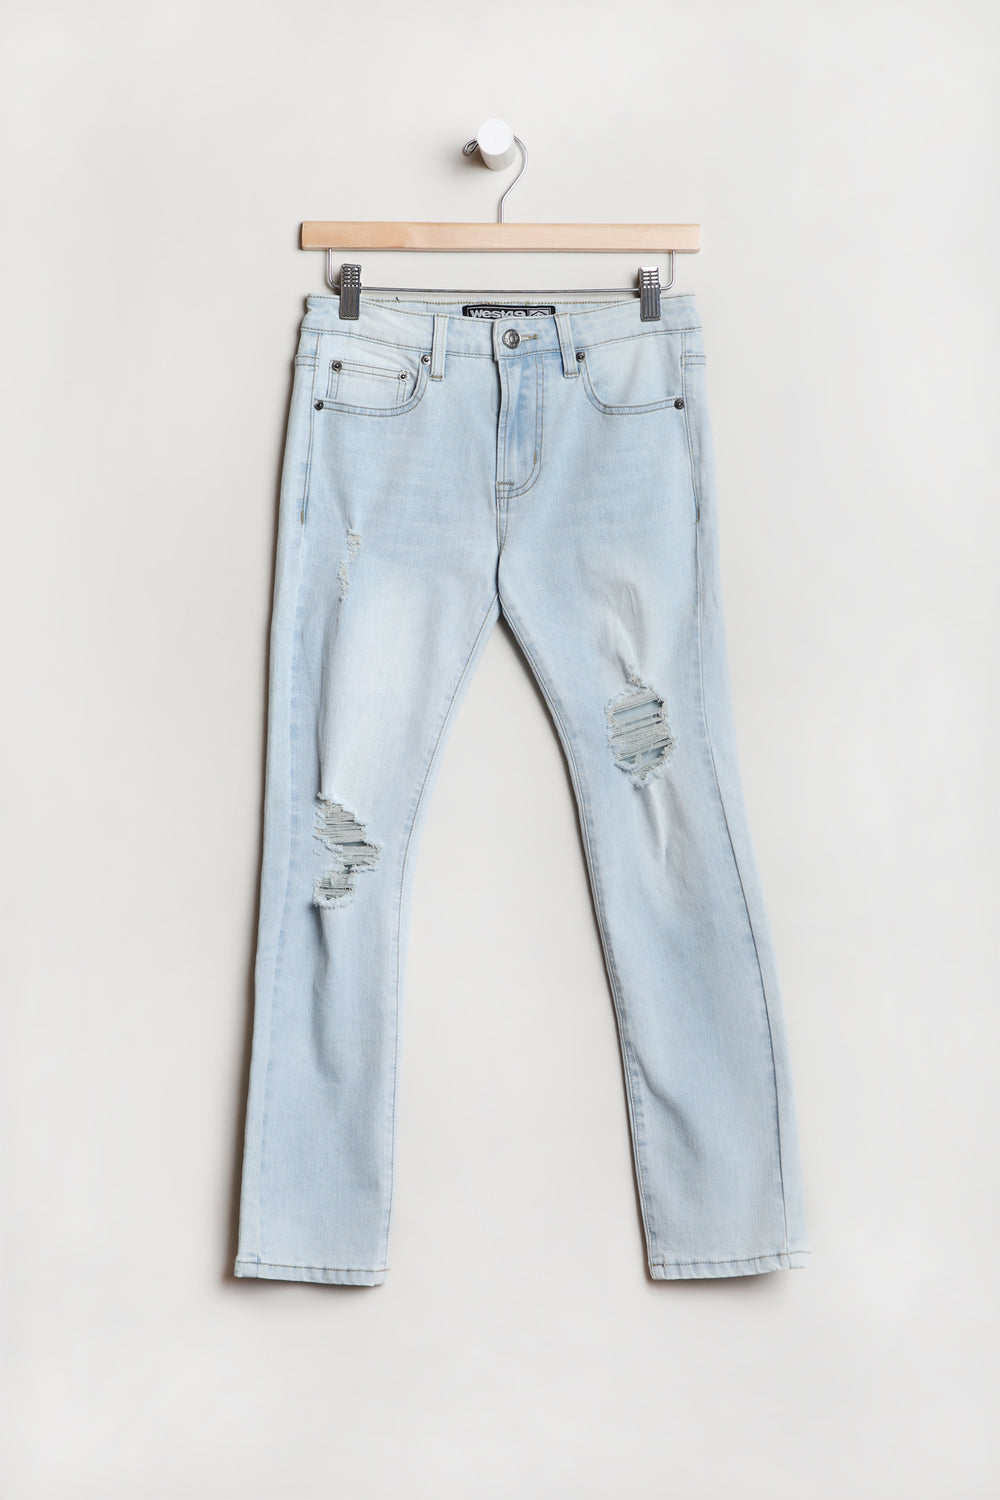 West49 Youth Distressed Skinny Jeans West49 Youth Distressed Skinny Jeans